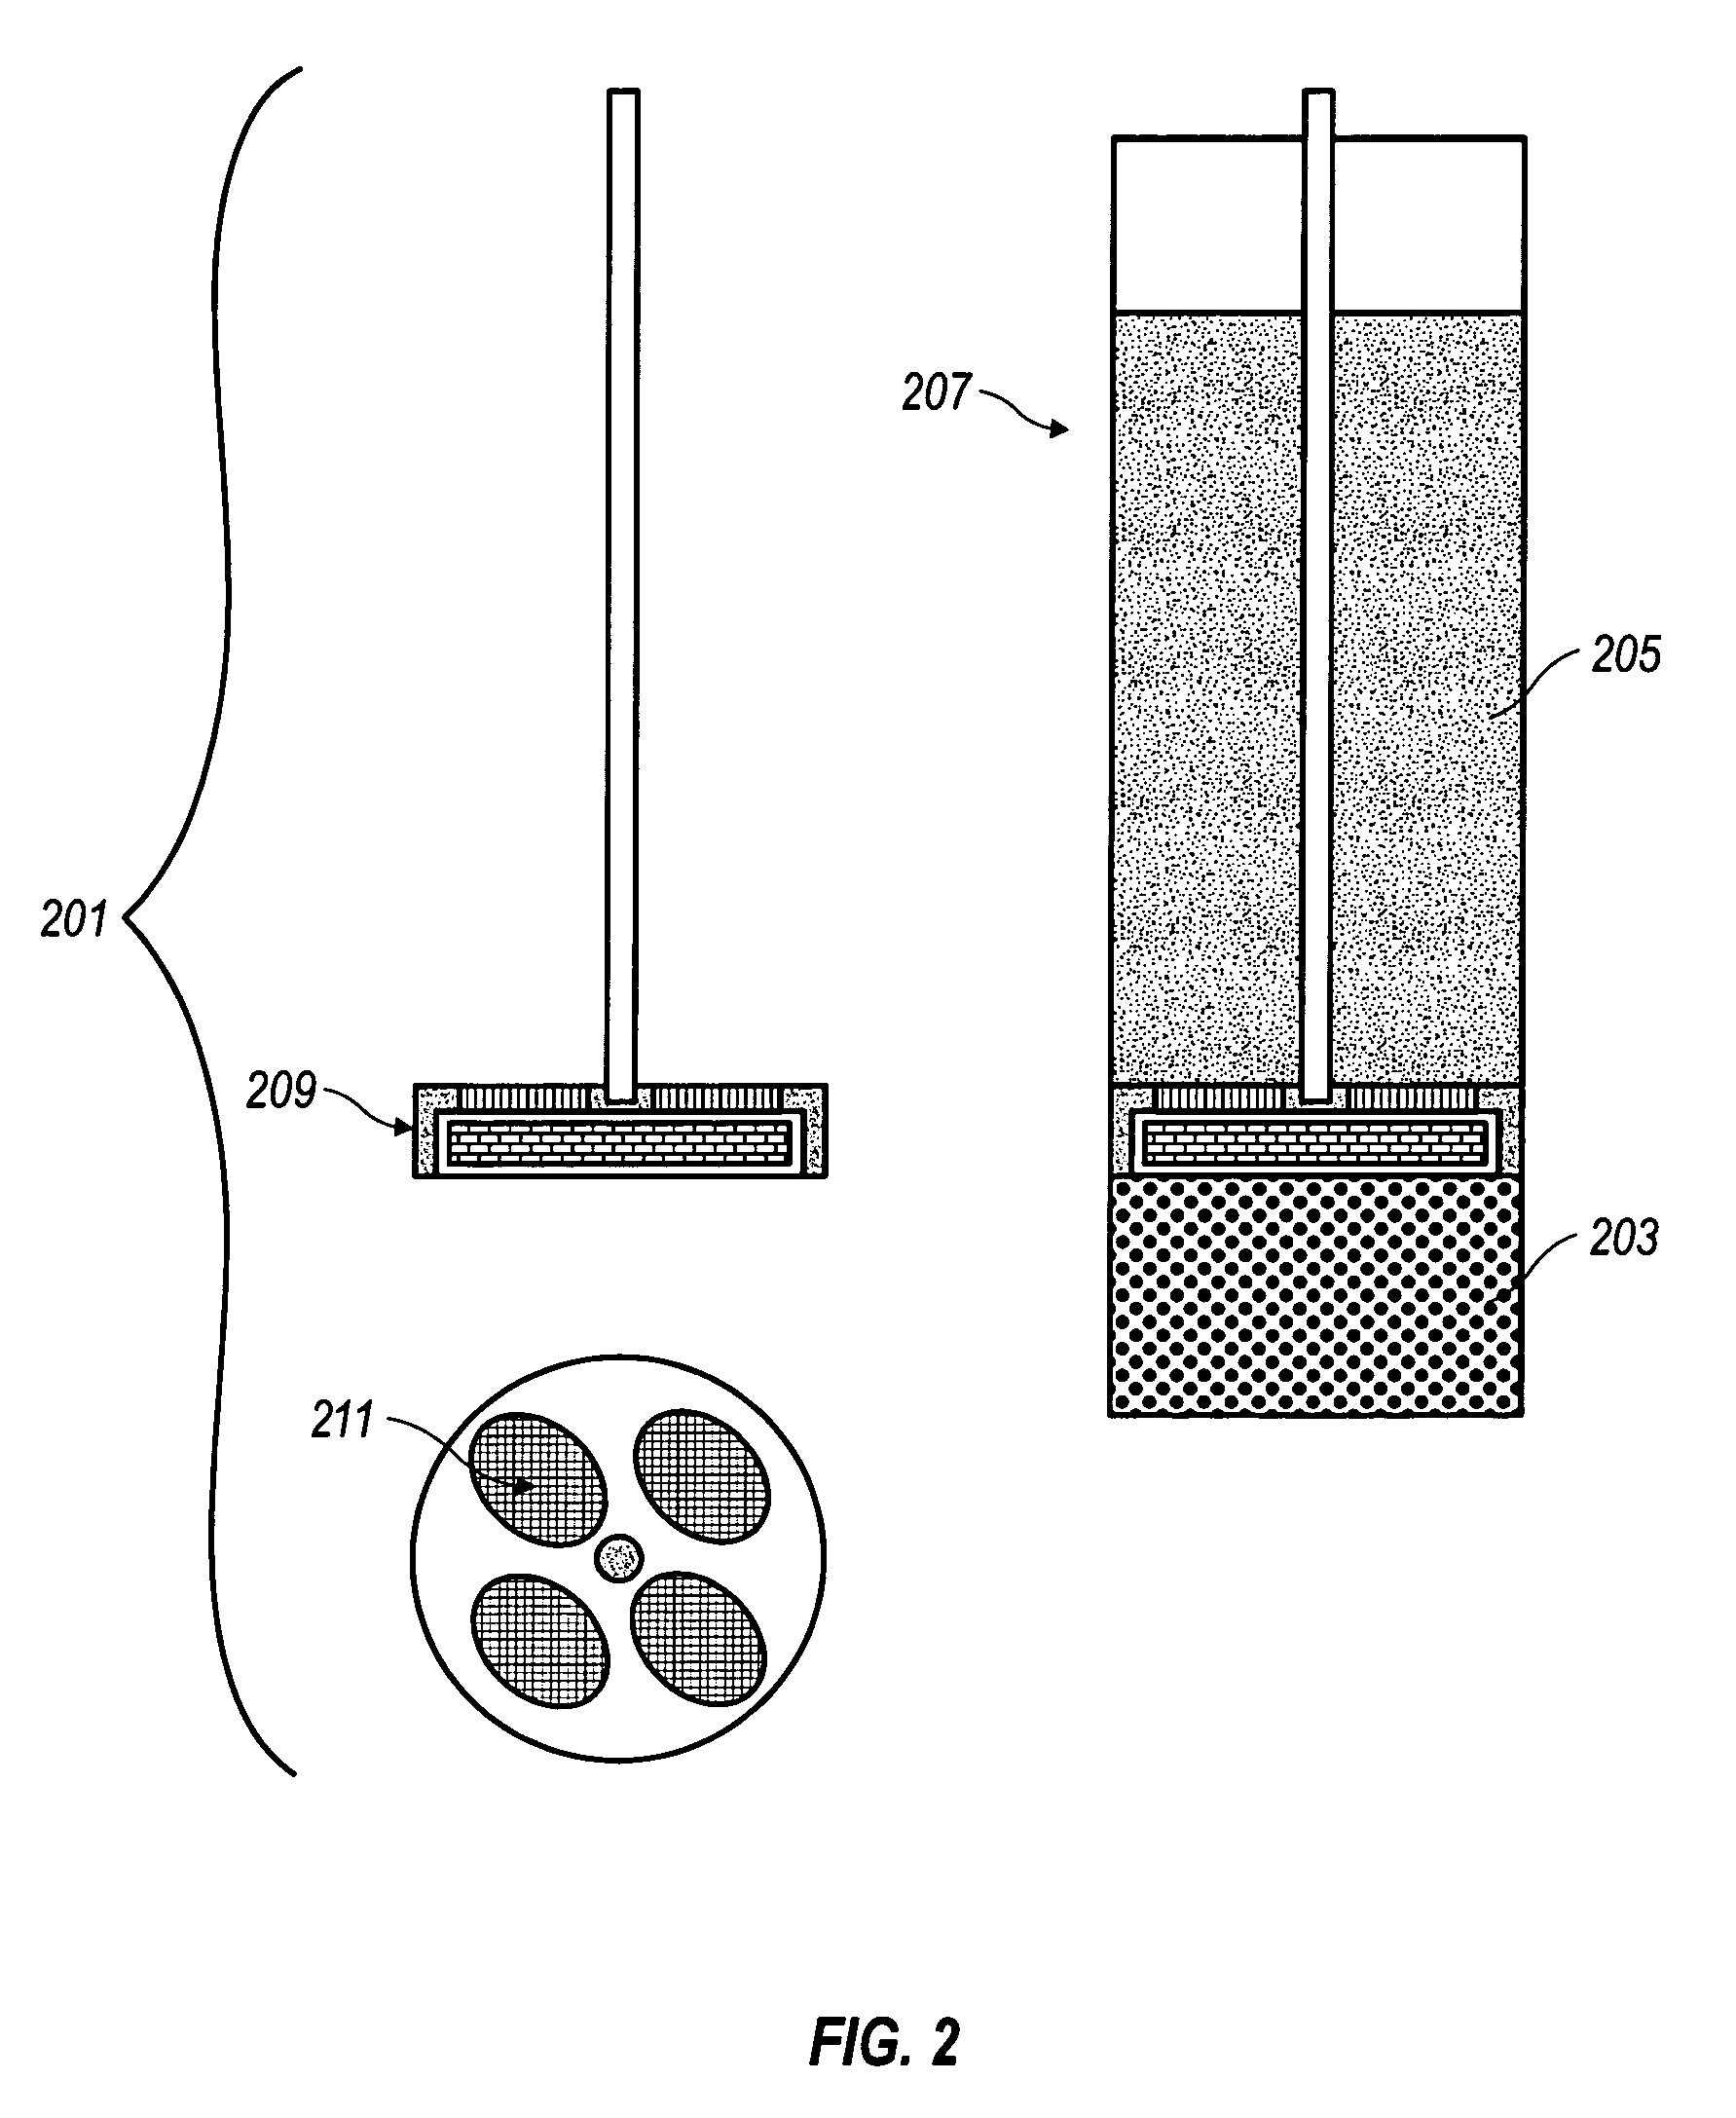 Volume-differential water assay system using hydrophilic gel